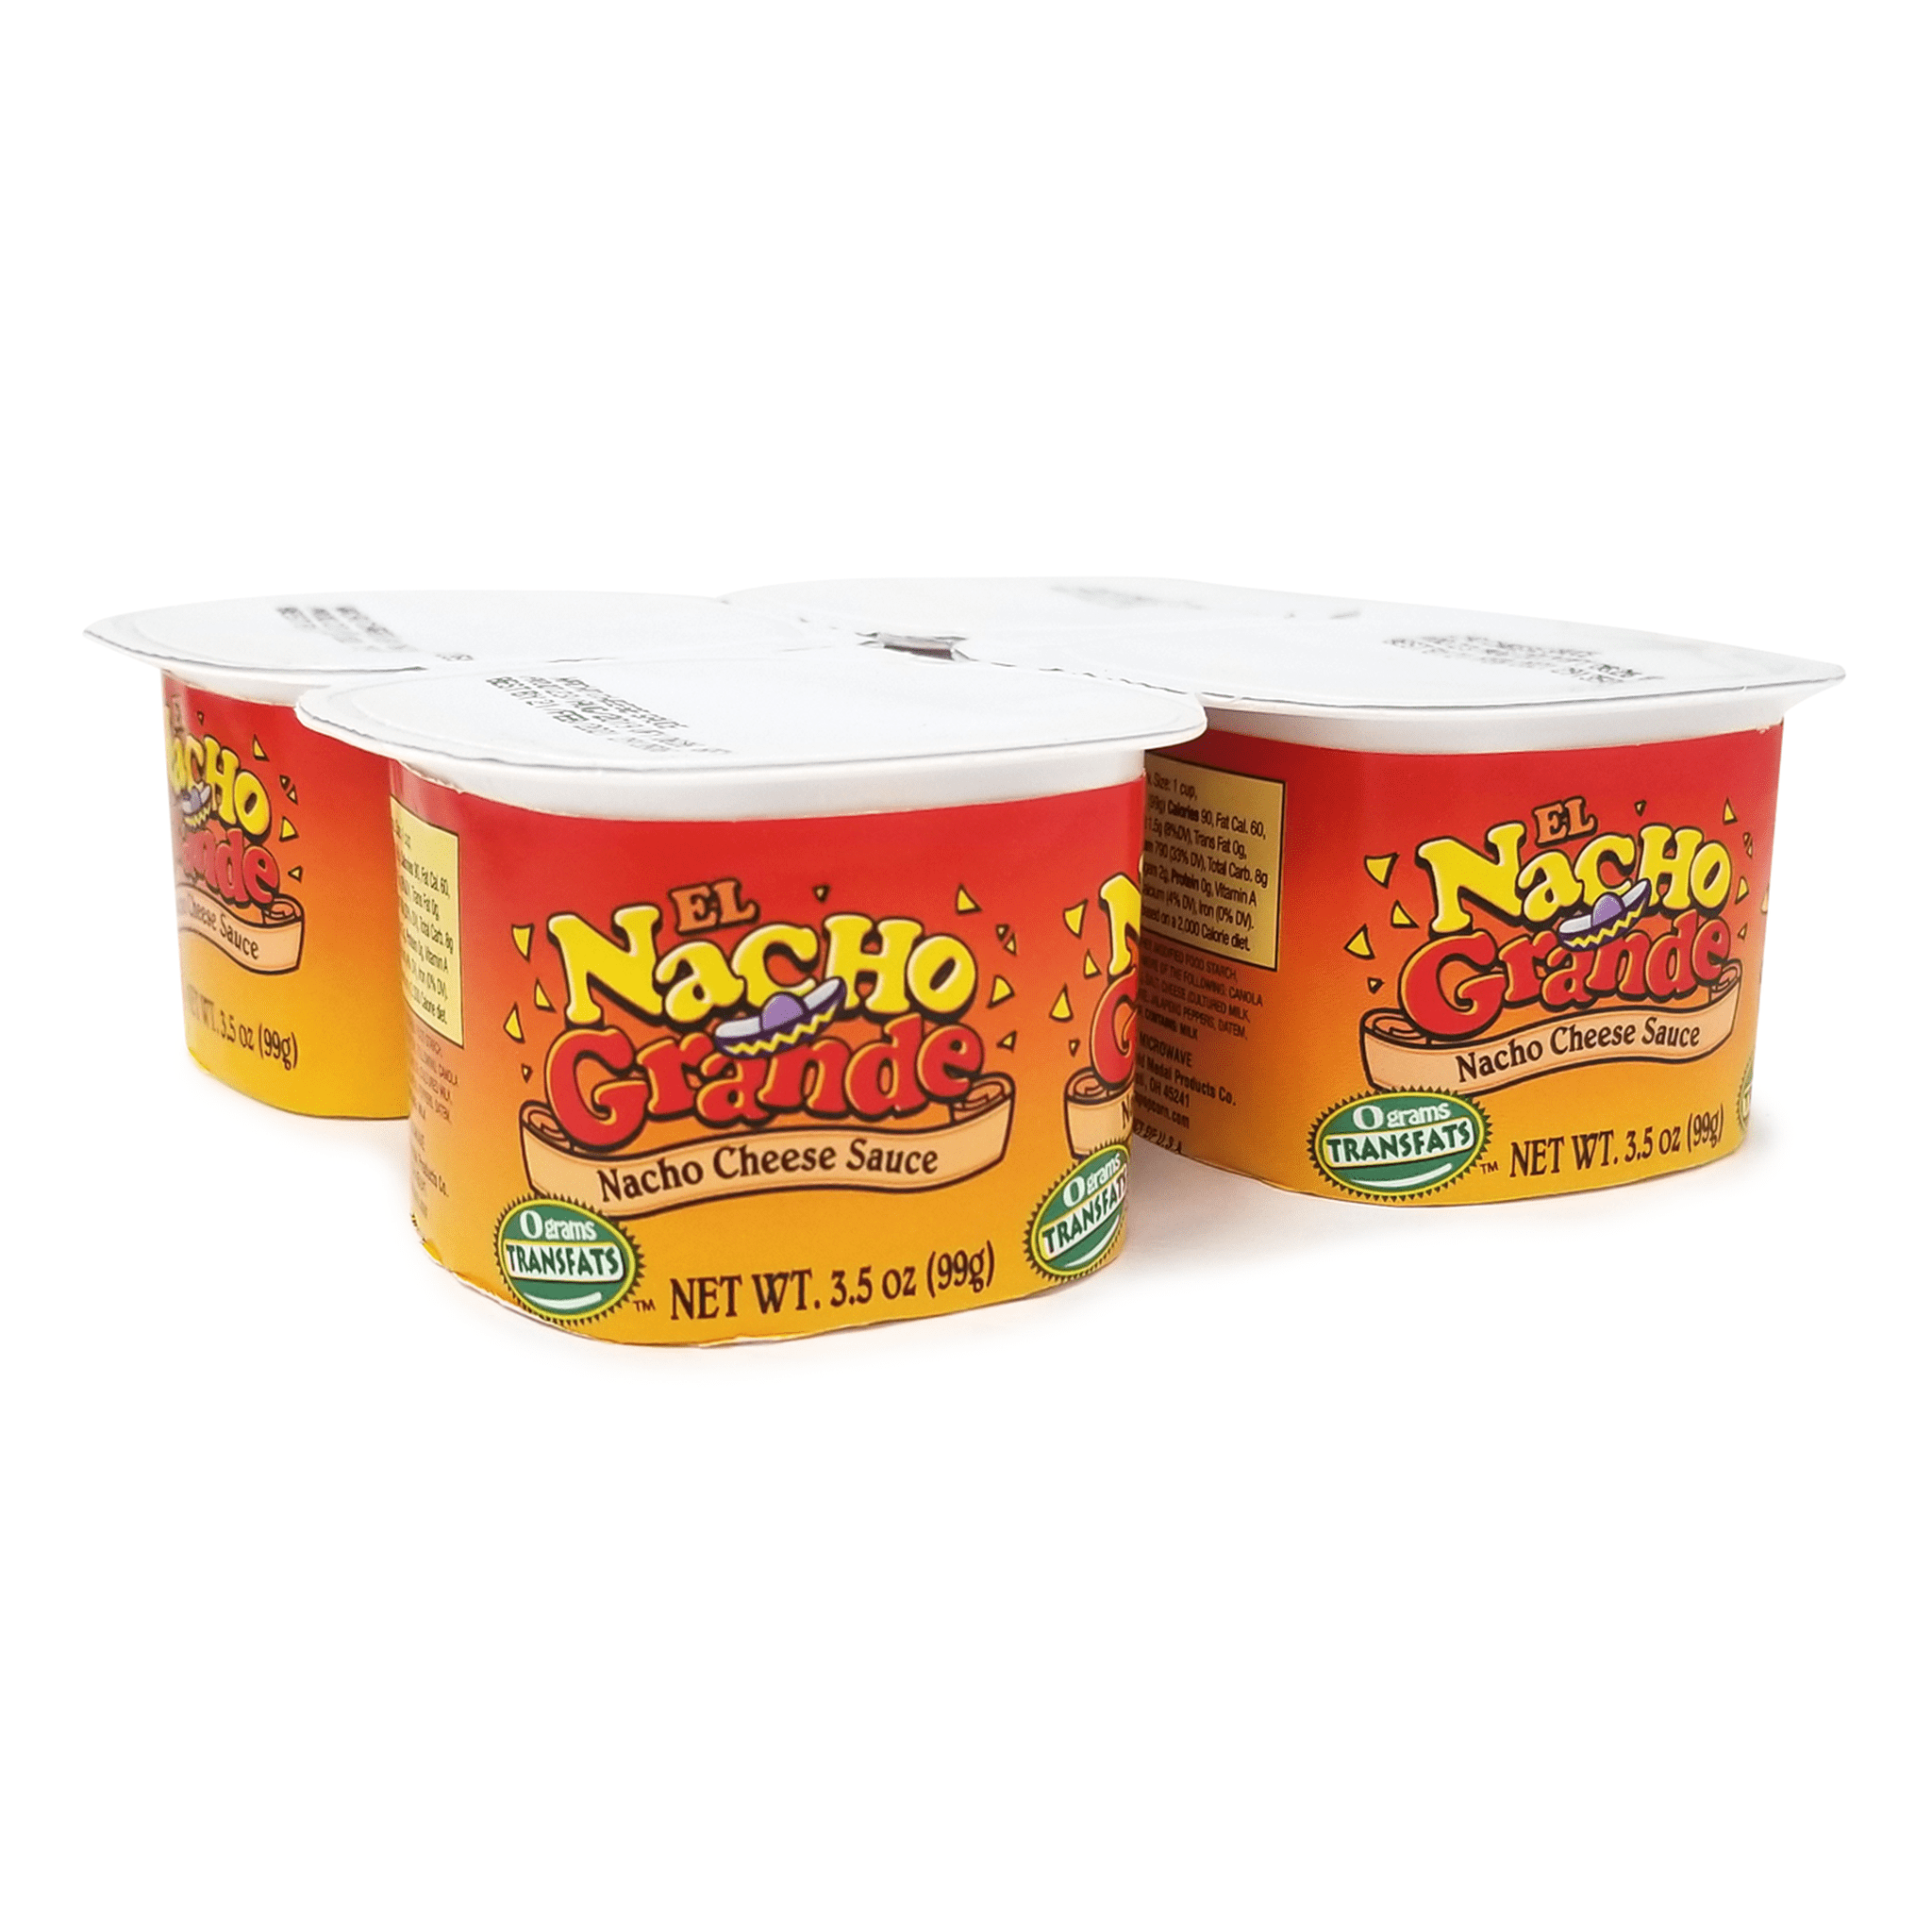 Nacho Cheese Sauce Cups Expiry date October